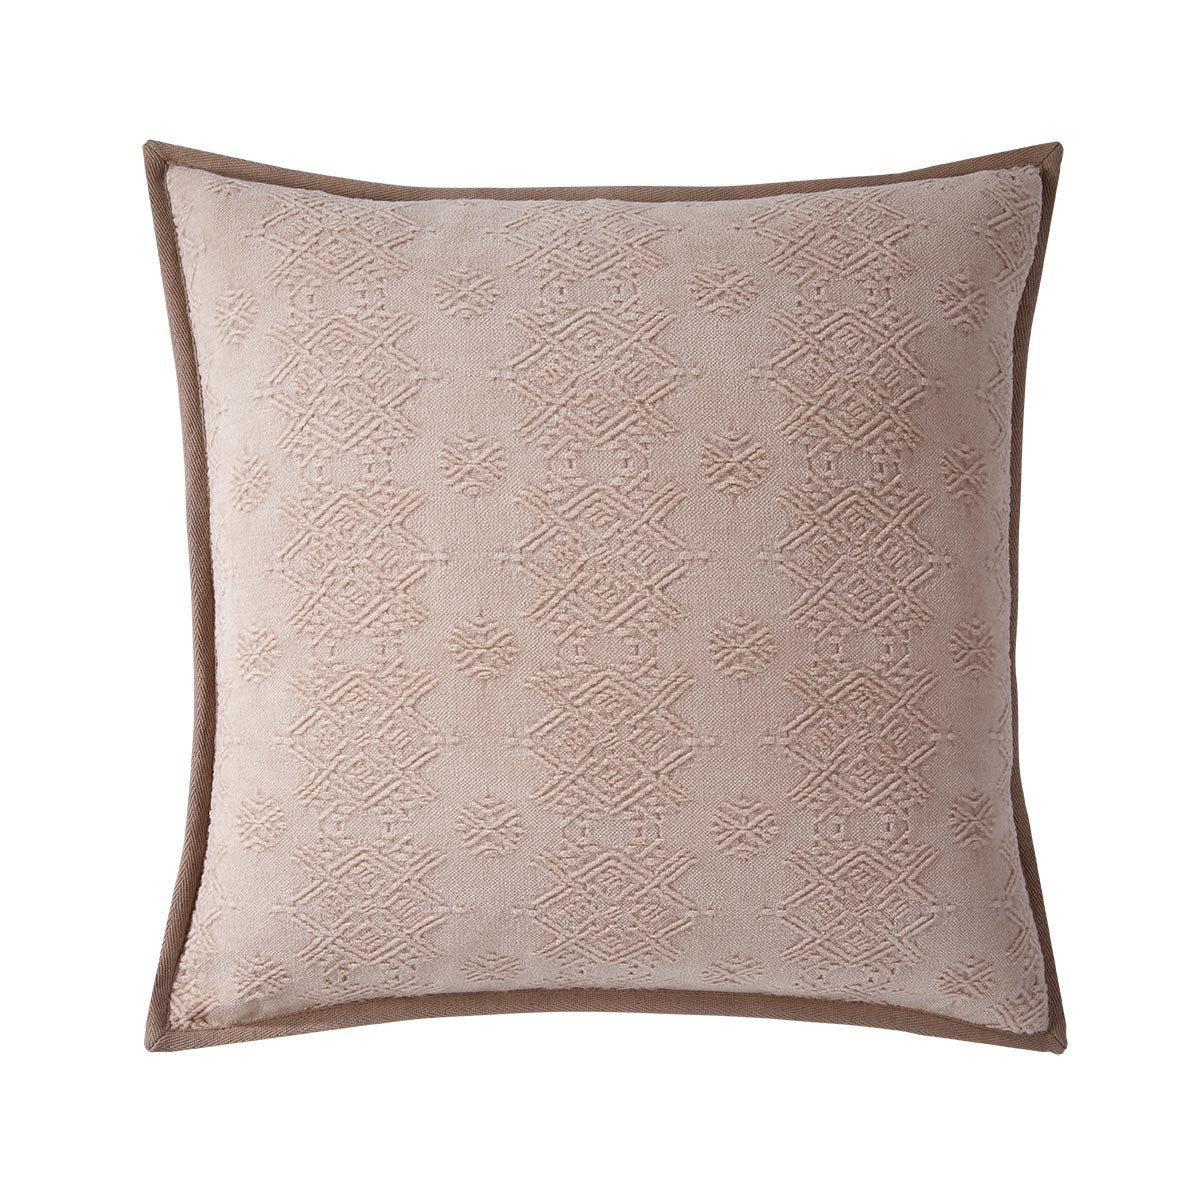 Syracuse Petale Decorative Pillow by Iosis | Fig Linens and Home